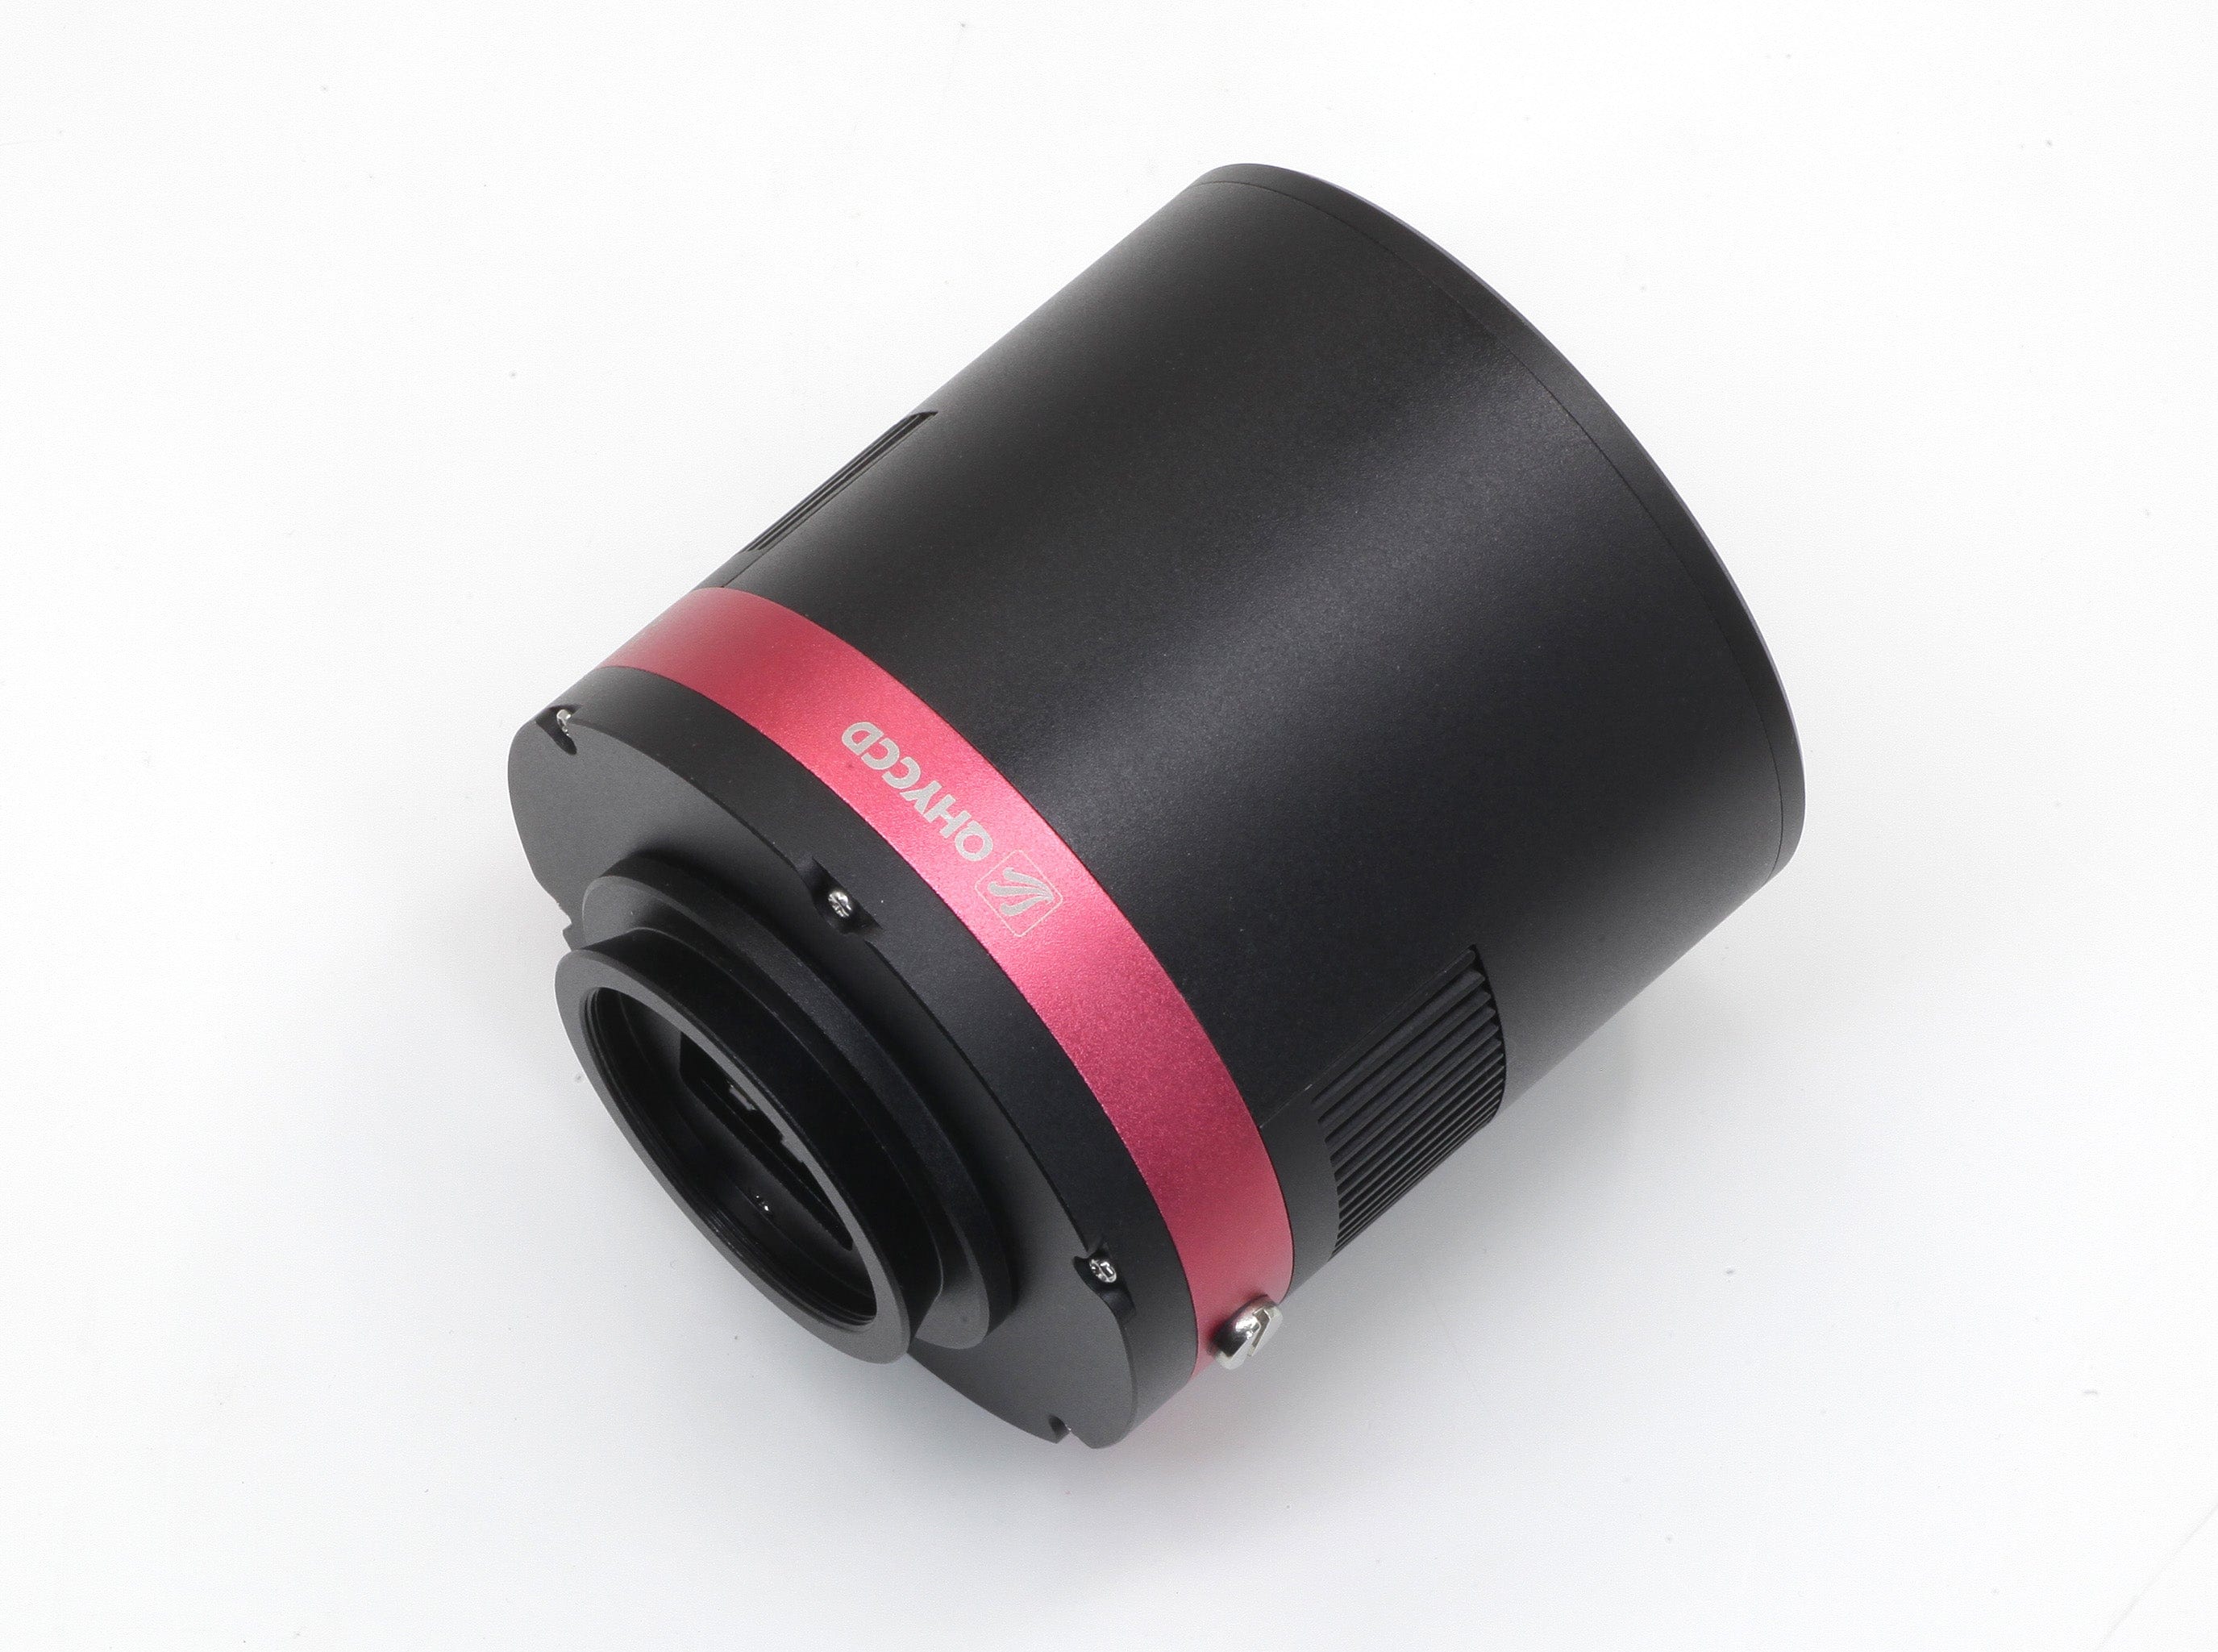 QHYCCD Camera QHYCCD QHY294C 11.6MP Cooled Color CMOS Telescope Astrophotography Camera